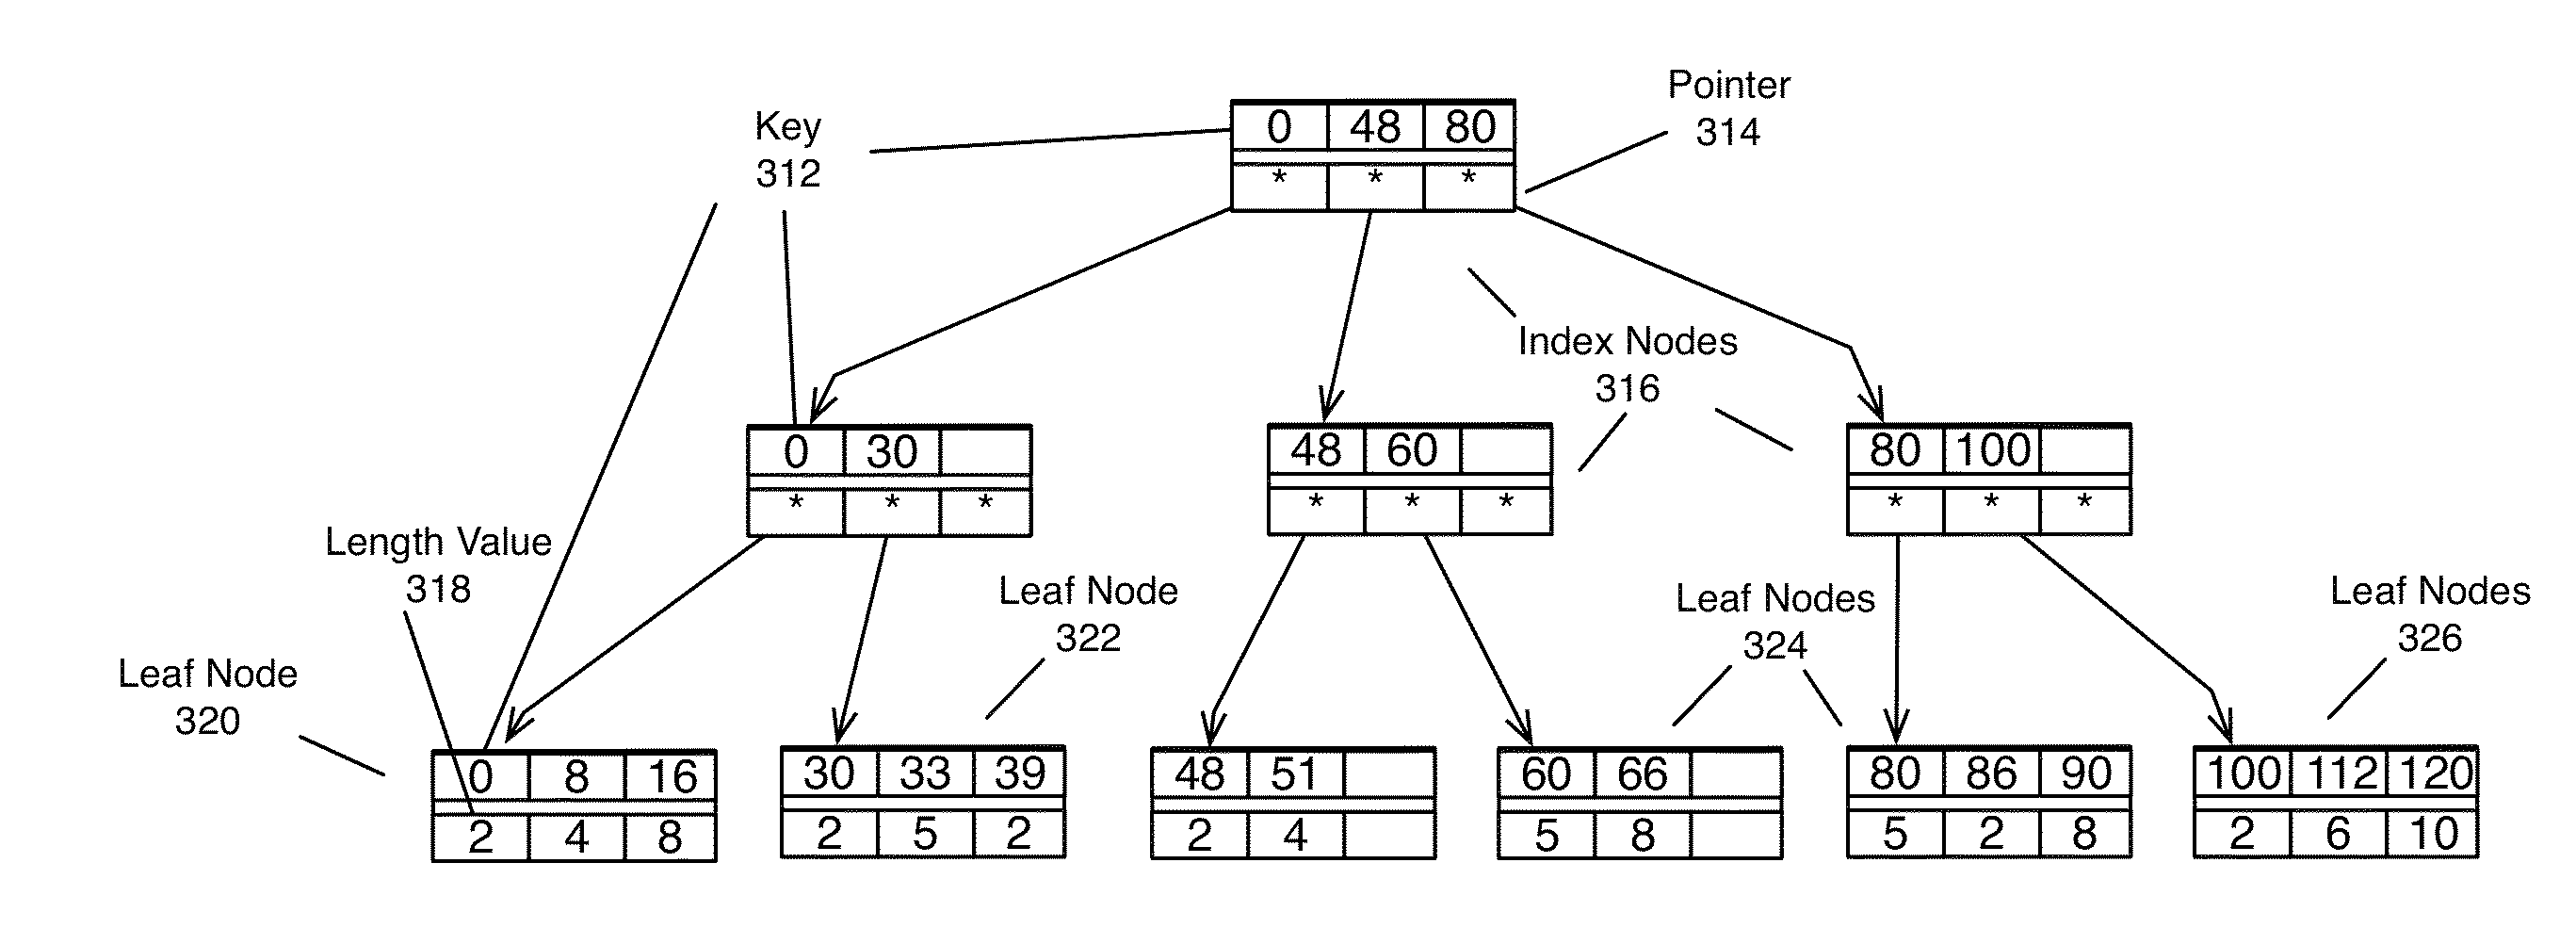 Concurrent access methods for tree data structures